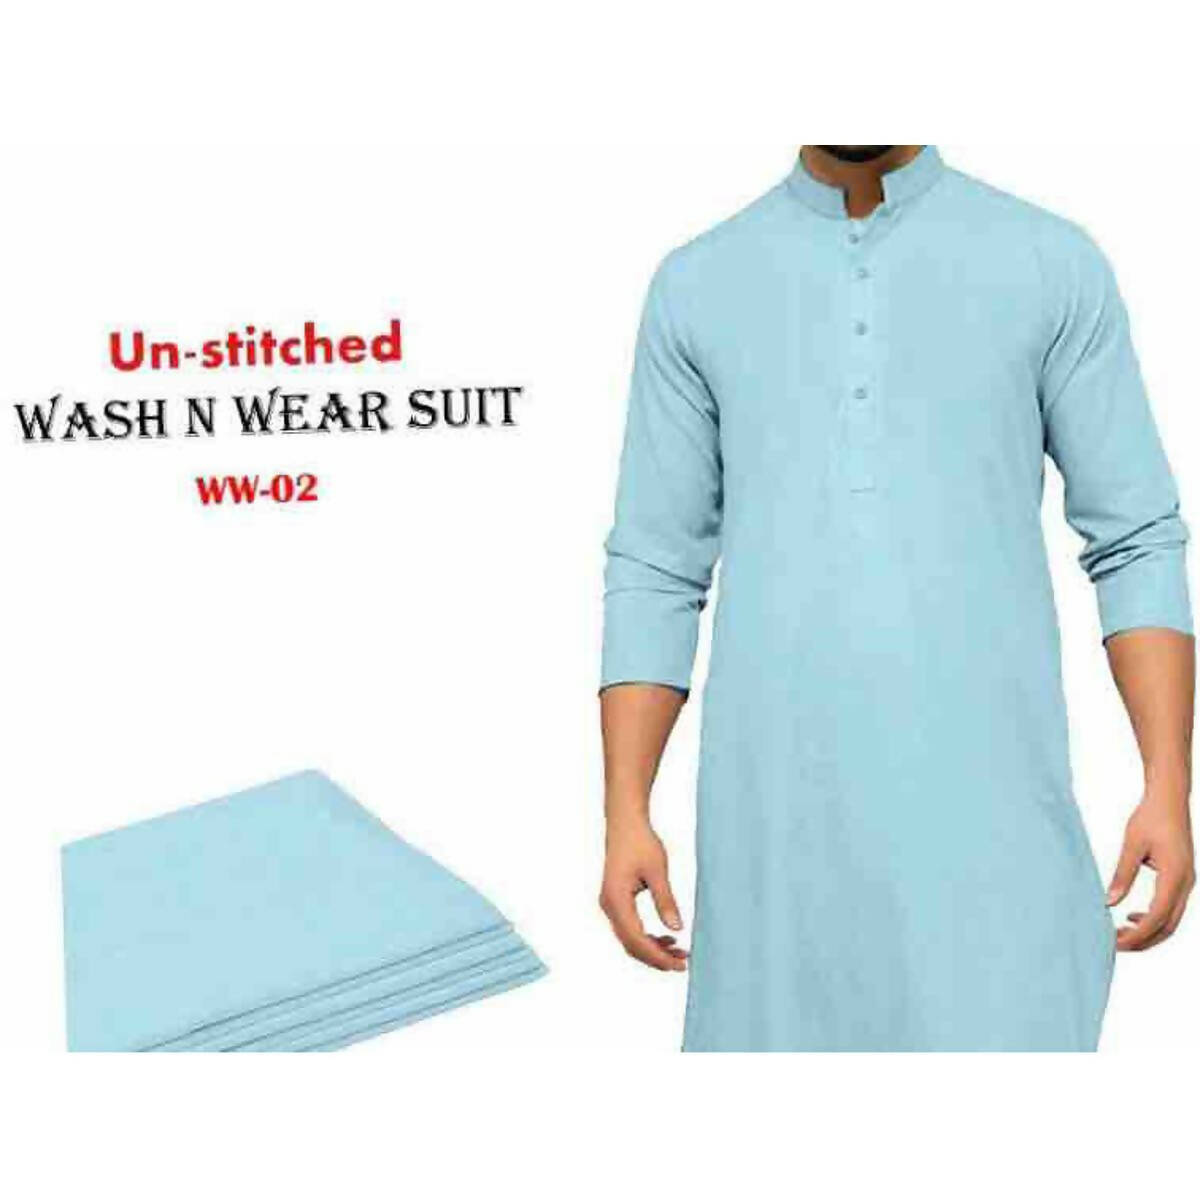 Pure wash N wear New suits for men in blue